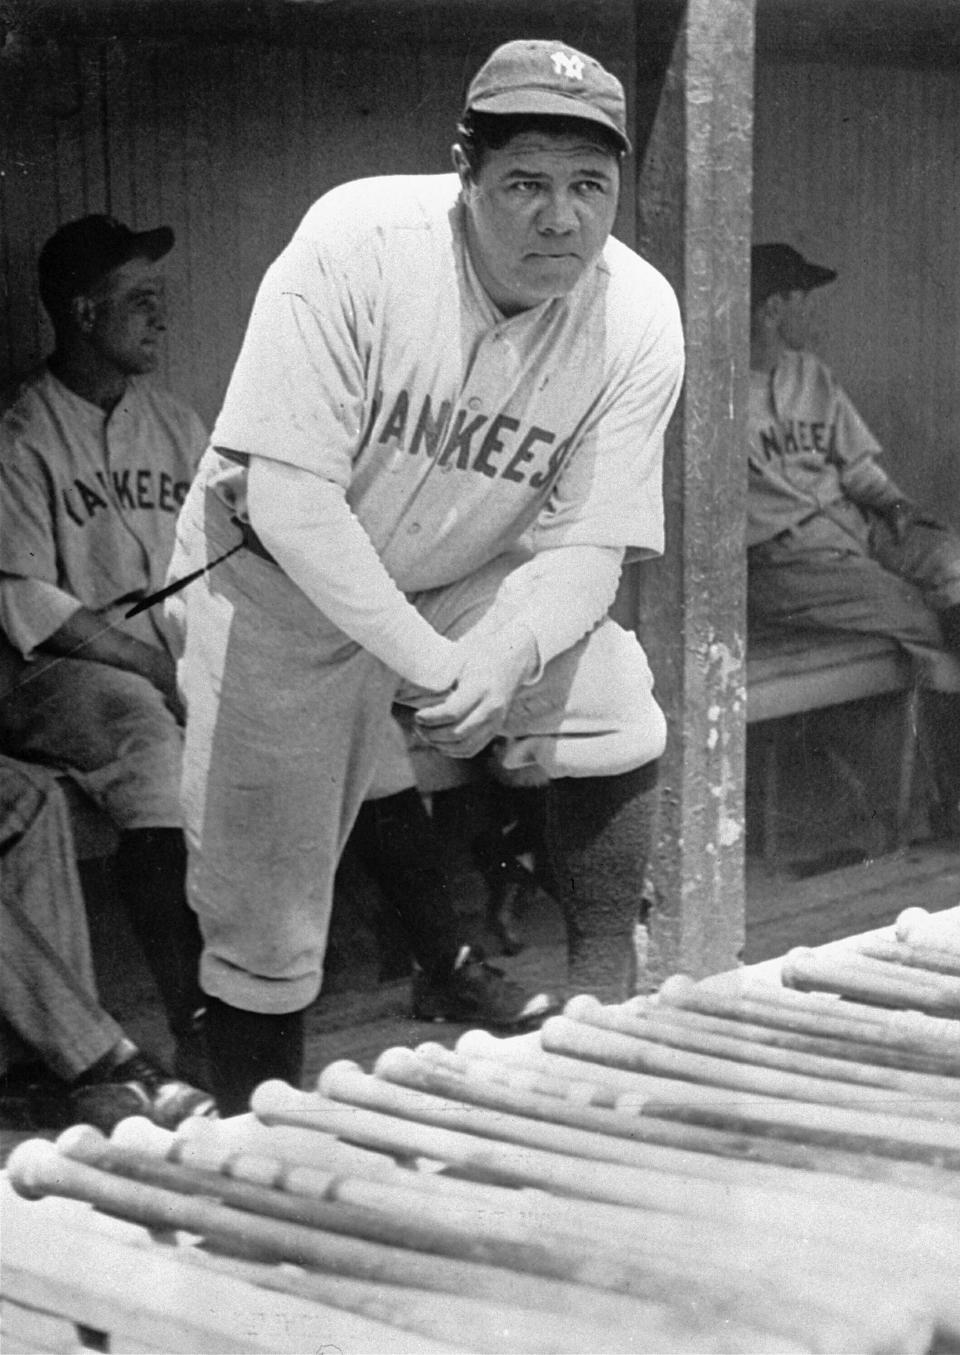 FILE - In this July 1929 file photo, New York Yankees' Babe Ruth, who was injured, stands in the dugout during the baseball team's game at Cleveland. A Babe Ruth road jersey dating to 1928-30 has sold at auction for $5.6 million. Hunt Auctions, which handled Saturday's sale, says the price breaks a record for the most expensive piece of sports memorabilia ever sold. A Ruth jersey from 1920 previously sold for $4.4 million. (AP Photo, File)